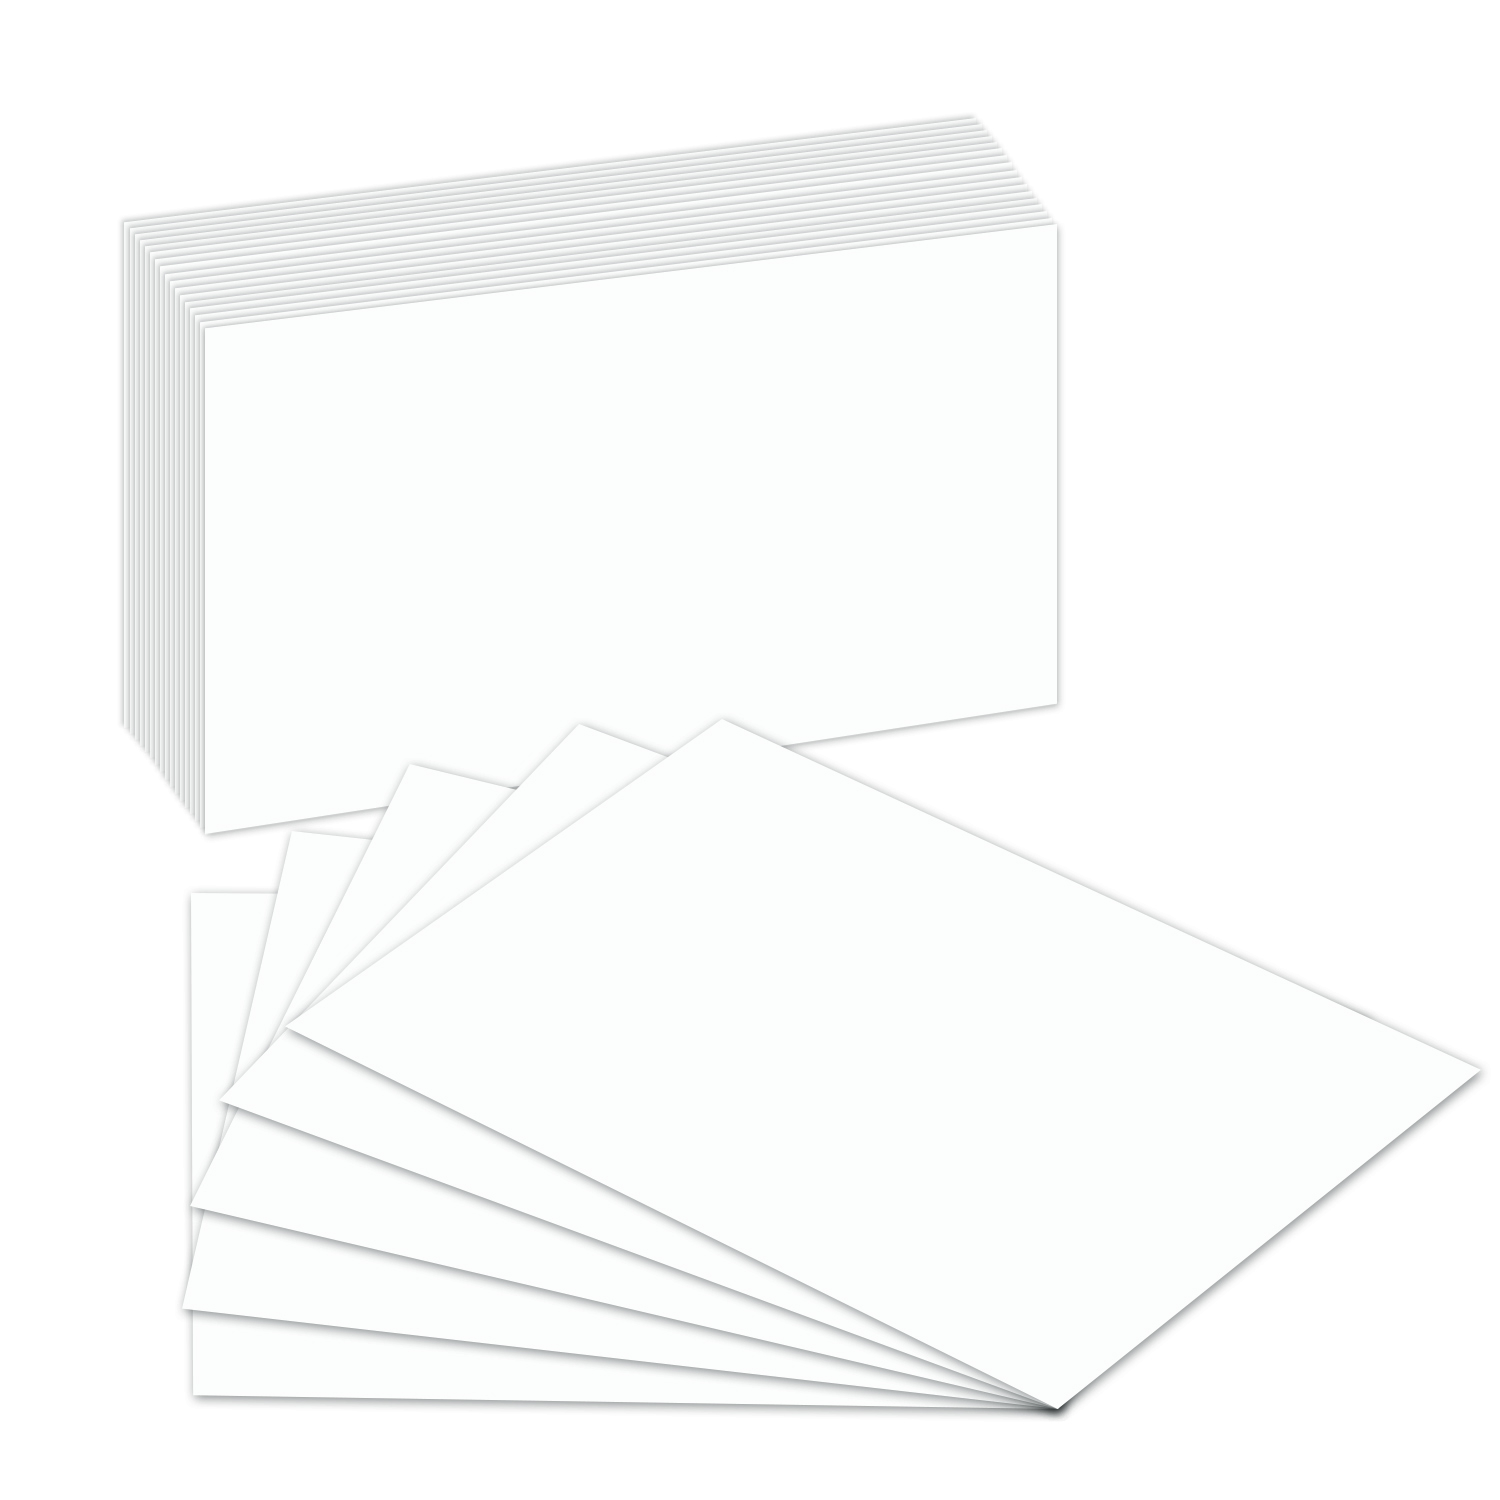 4 x 6 Thick Blank Index Cards - 100lb Cardstock (14pt) - 100 Sheets